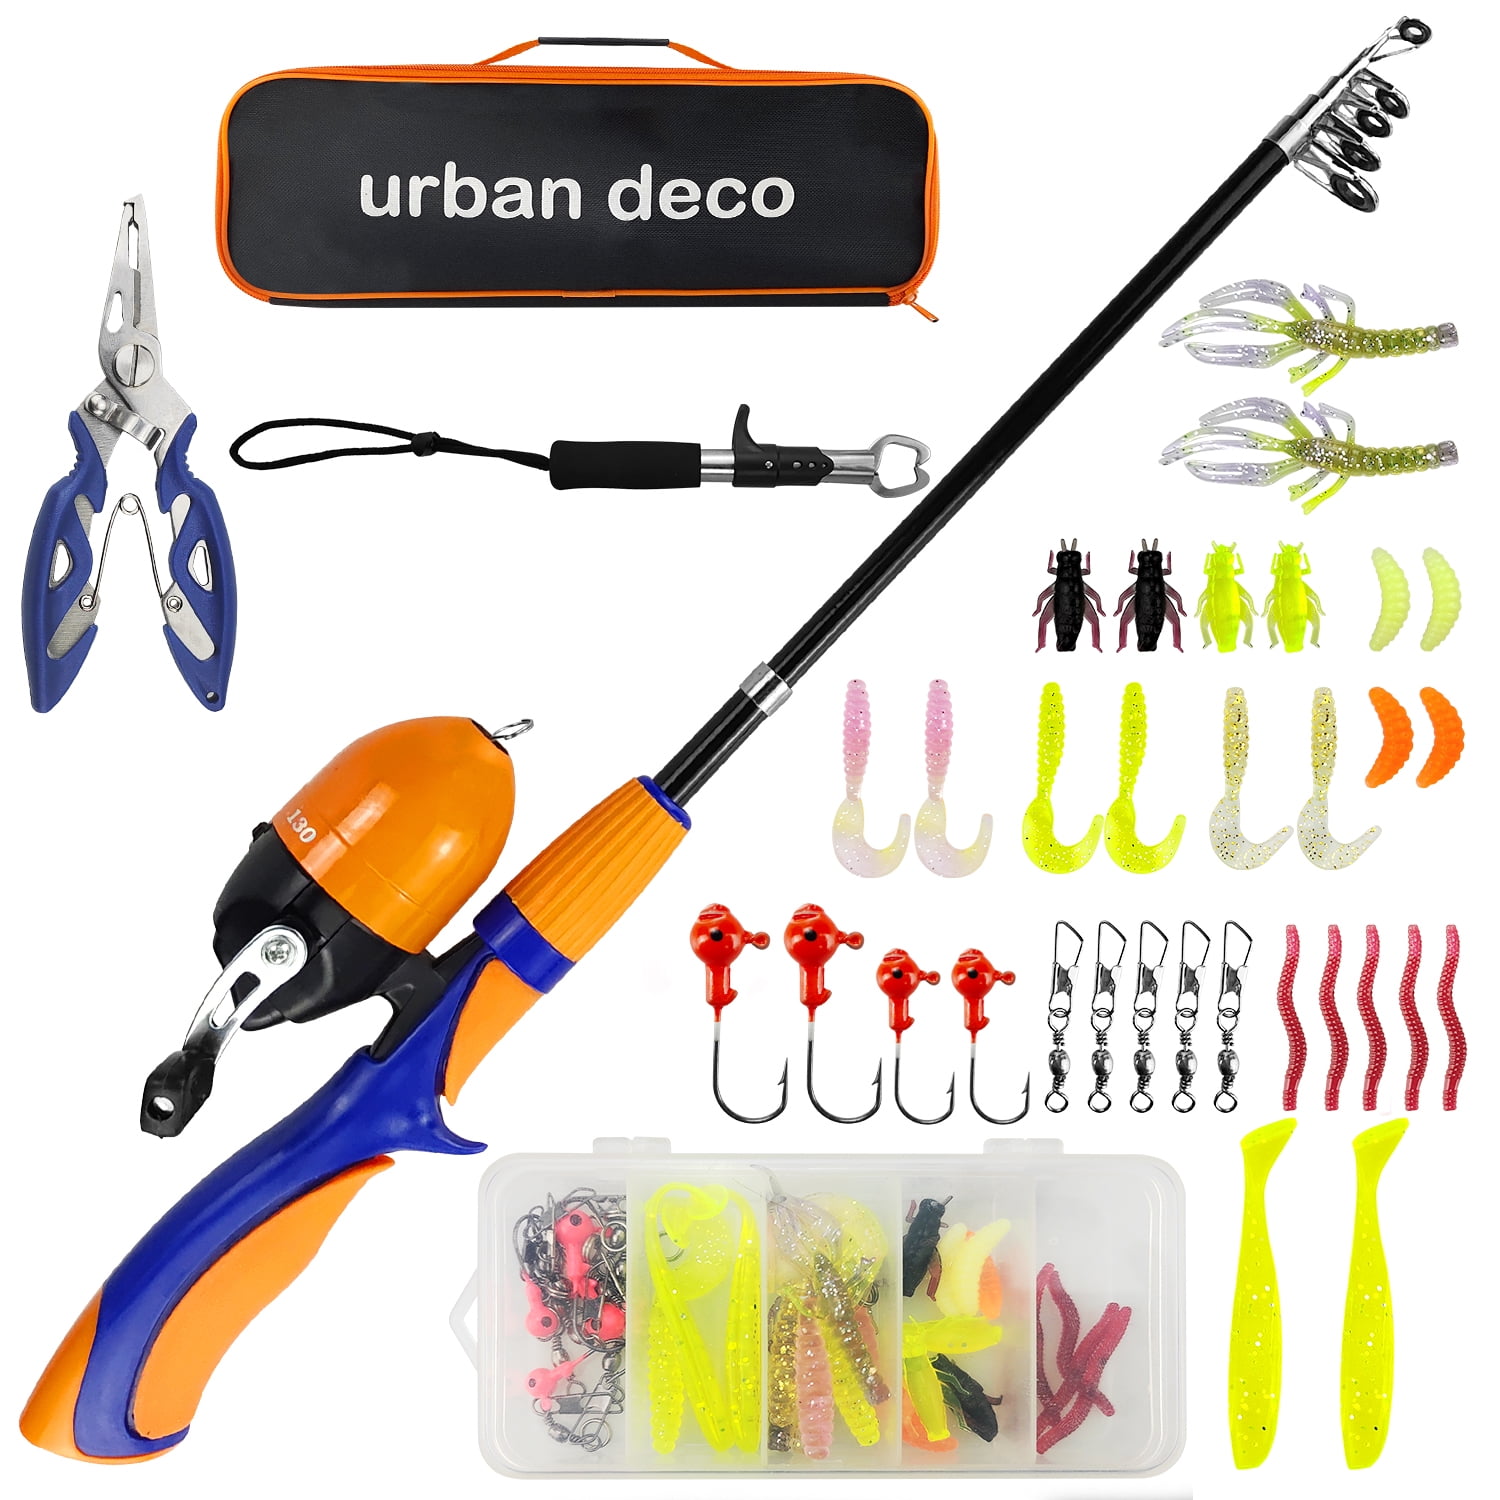 Urban Deco Kids Fishing Pole Set Portable Telescopic Kids Fishing Rod and Reel Combo Kit with Tackle Box for Beginners, Boys,Girls,Youth,Children